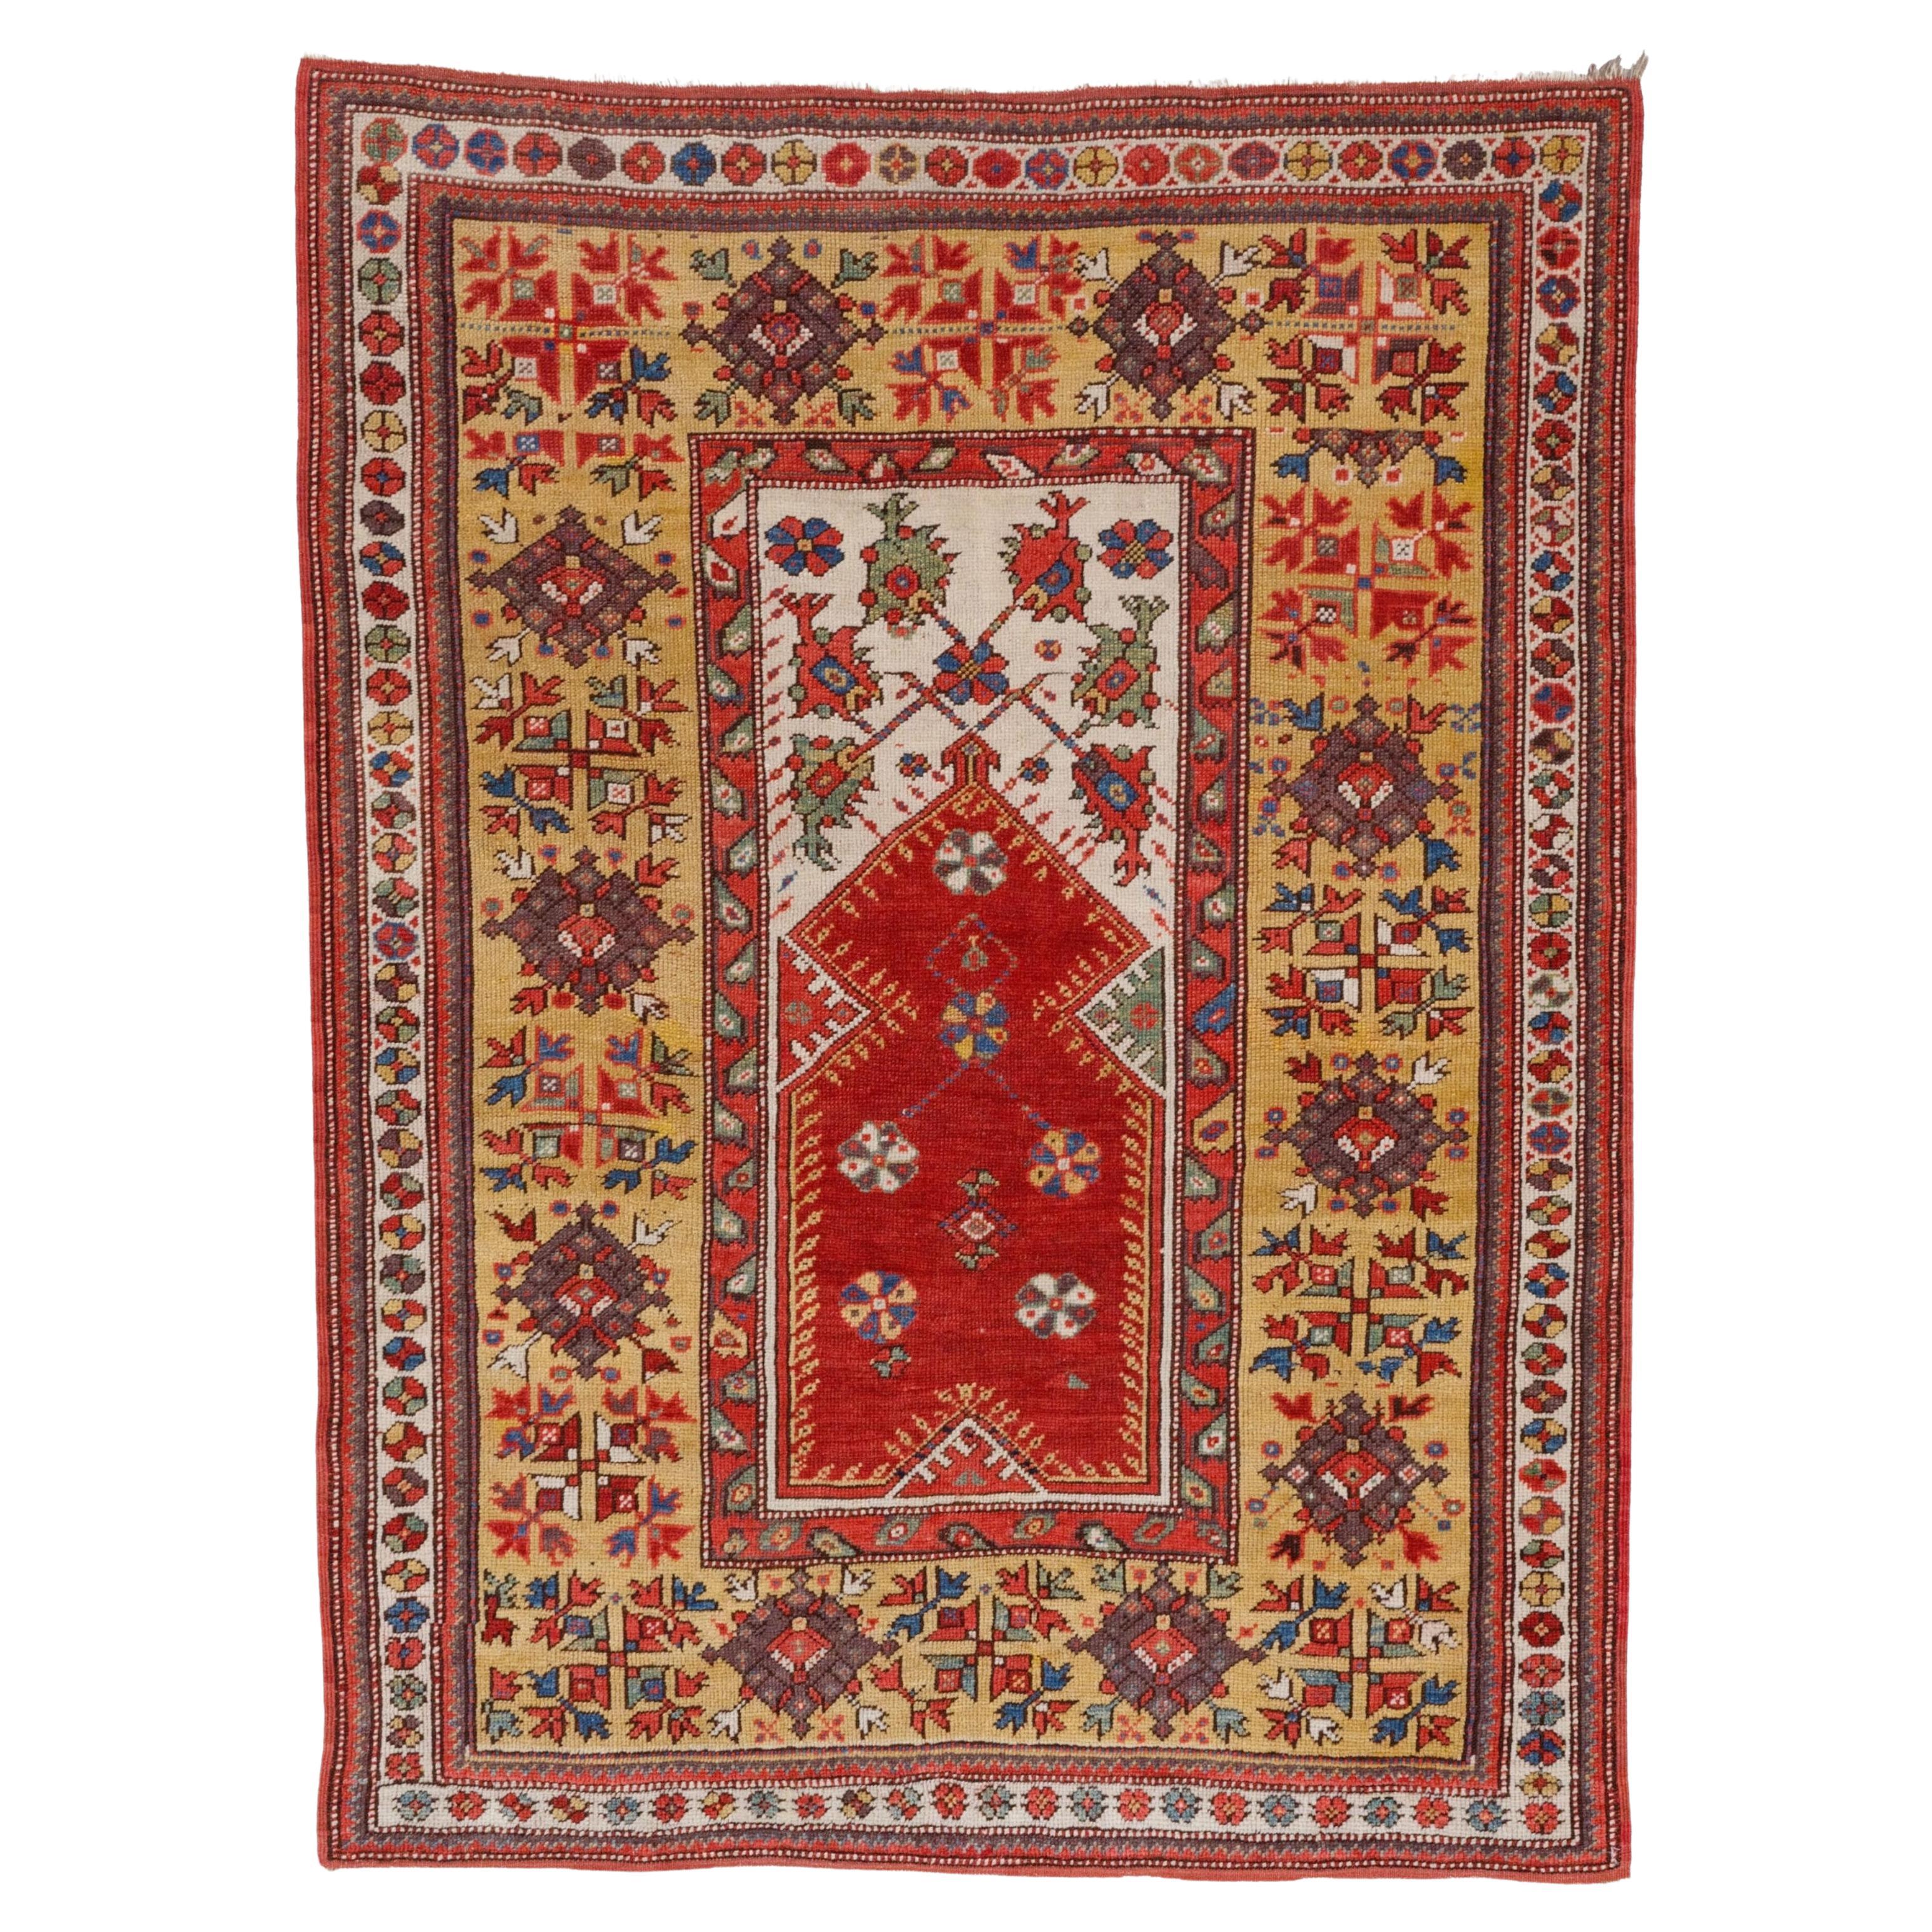 Antique Melas Prayer Rug - Middle Of The 19th Century Anatolian Milas Prayer Rug For Sale